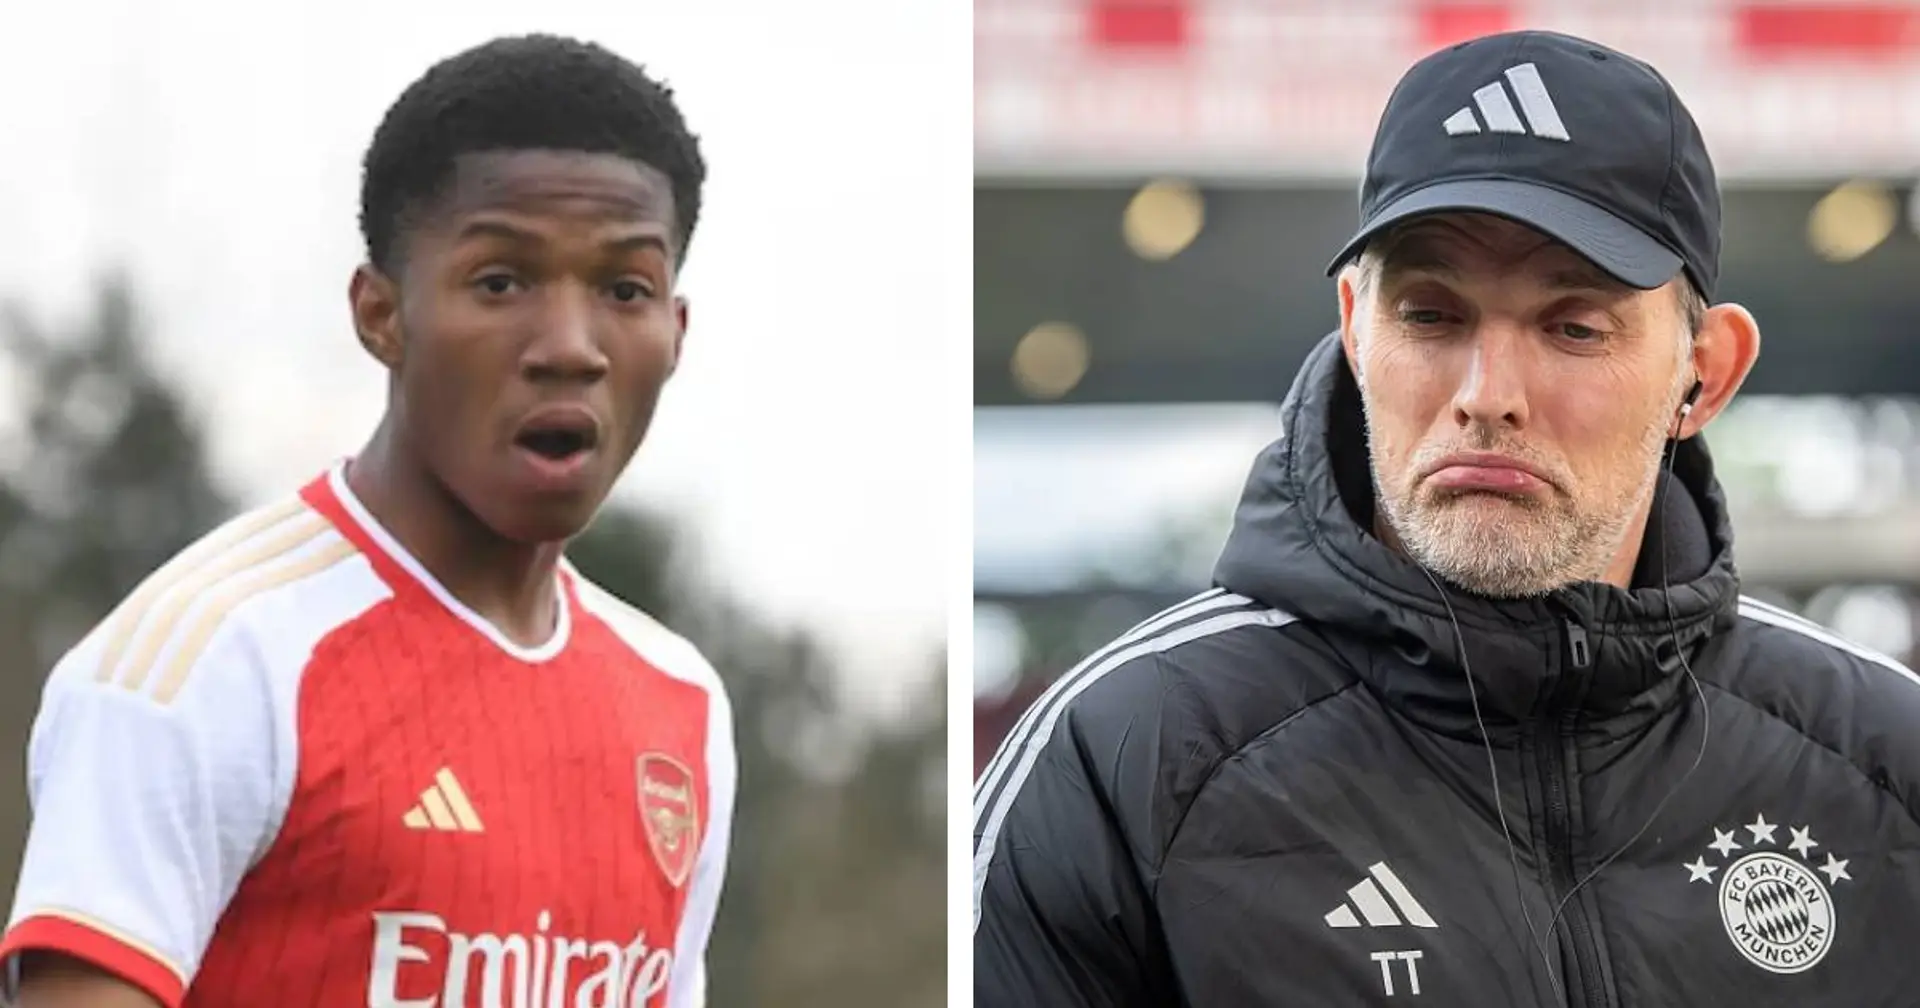 Bayern Munich eager to sign Arsenal teen who scored 10 goals in one game 